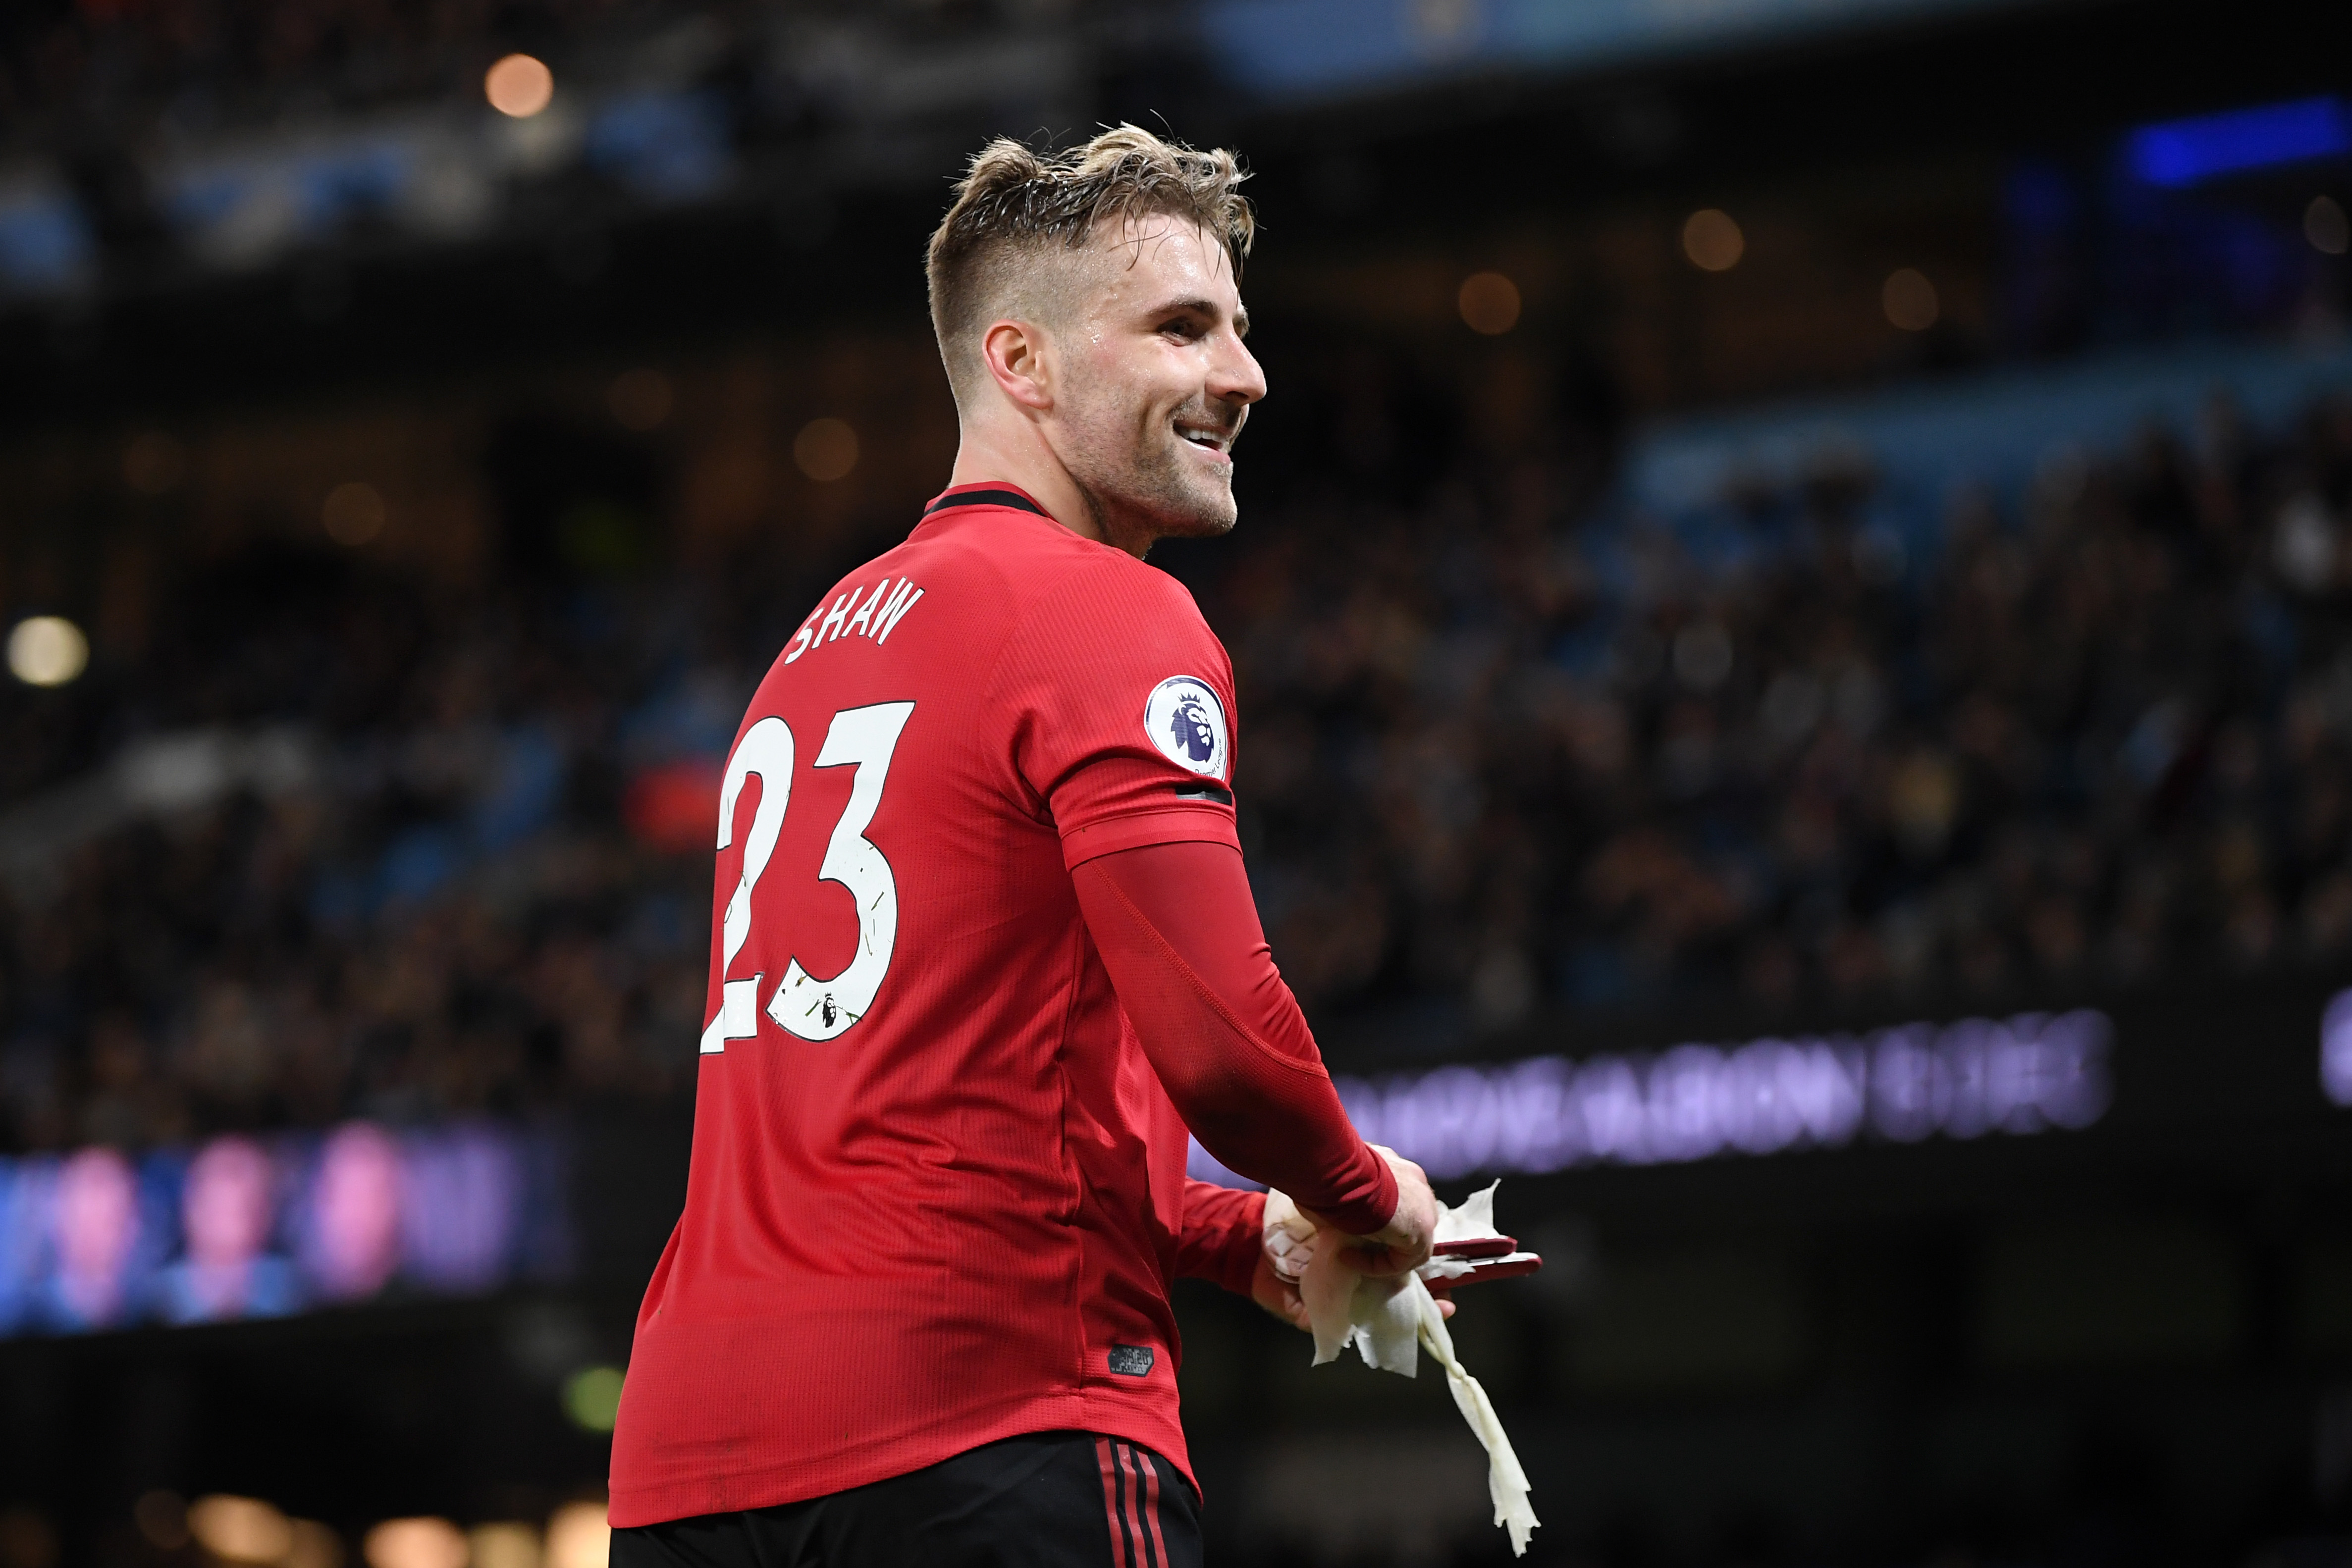 MANCHESTER, ENGLAND - DECEMBER 07: Luke Shaw of Manchester United reacts as he is substituted off during the Premier League match between Manchester City and Manchester United at Etihad Stadium on December 07, 2019 in Manchester, United Kingdom. (Photo by Michael Regan/Getty Images)